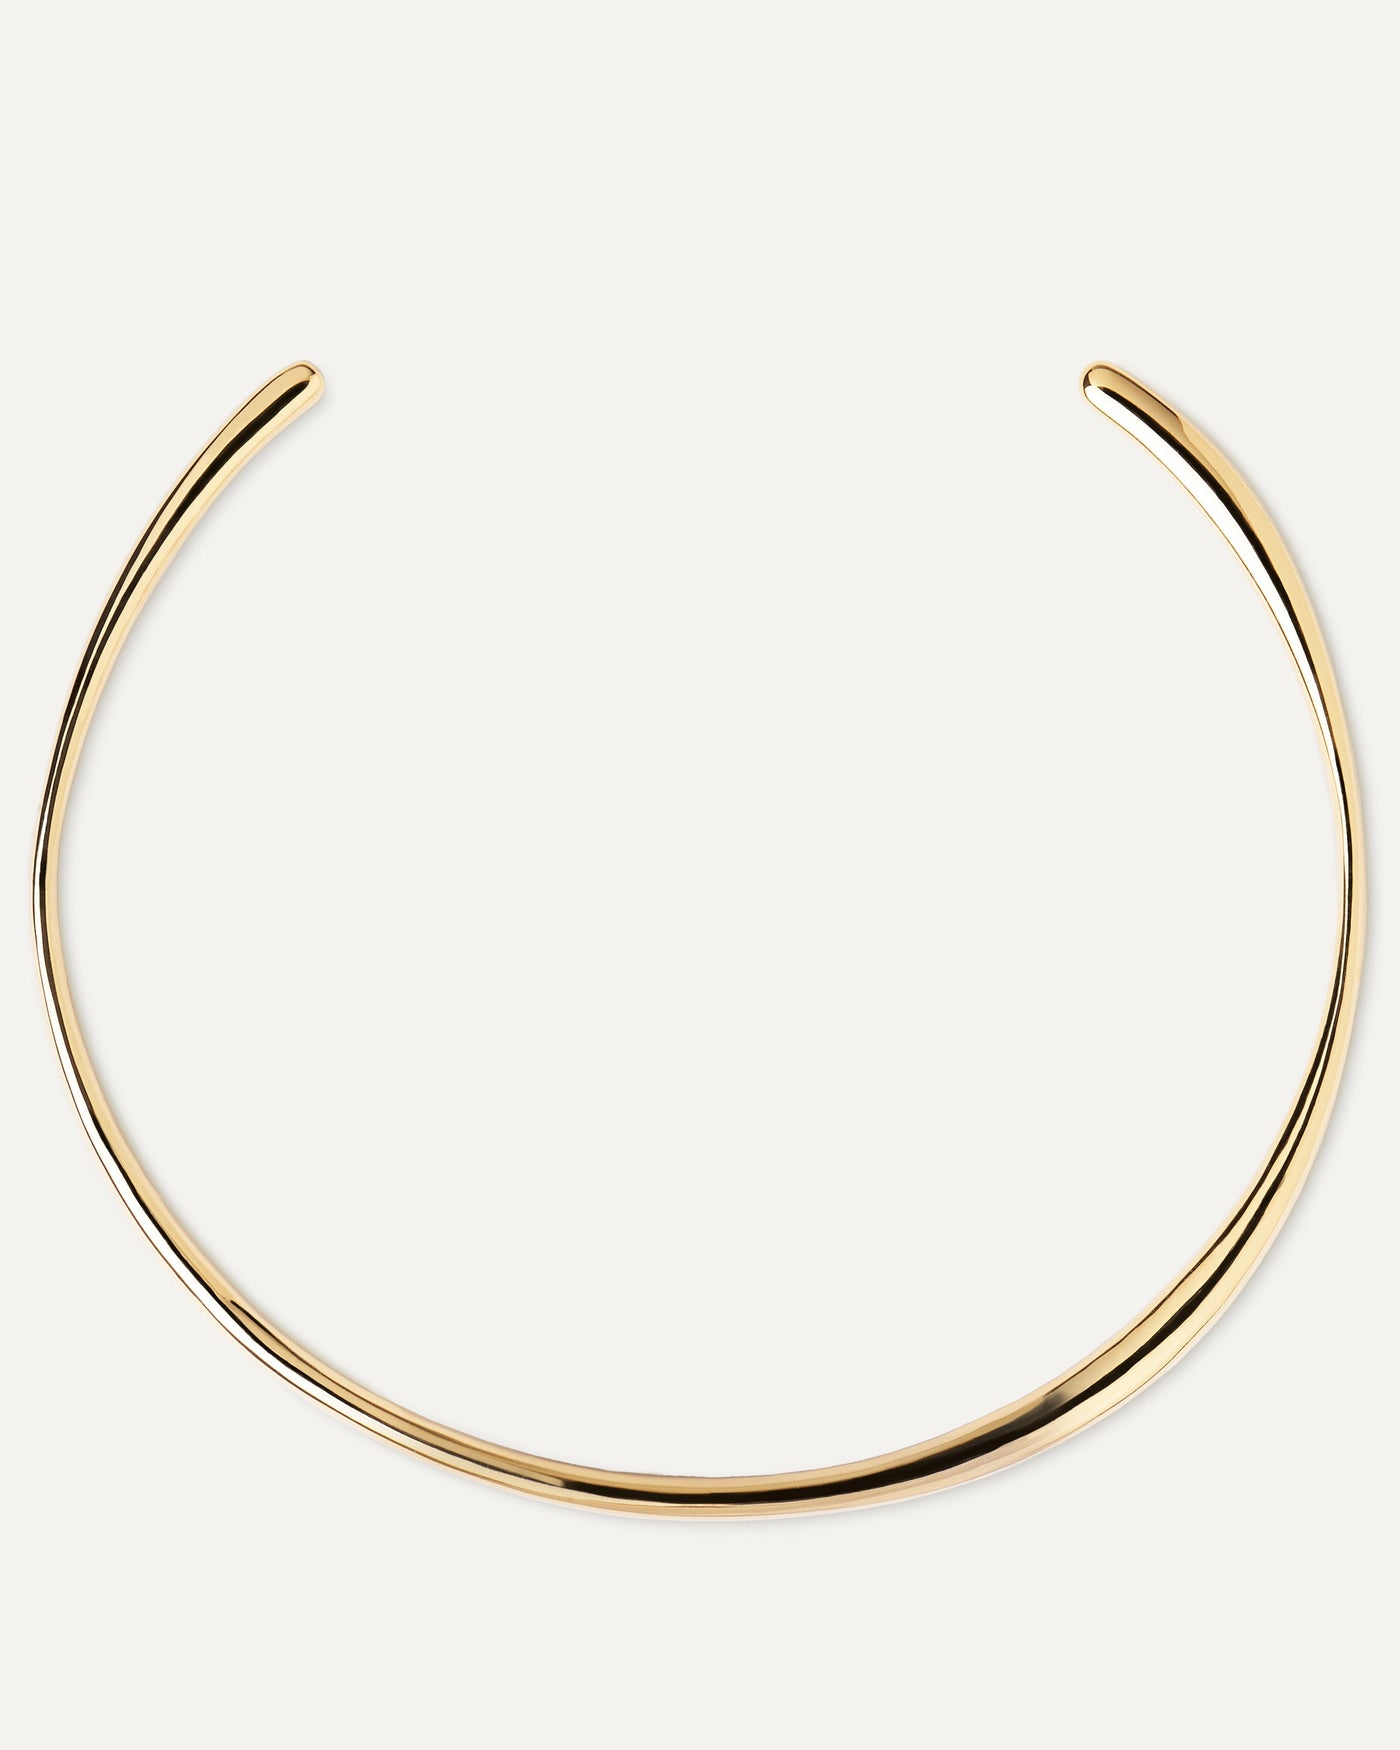 2023 Selection | Pirouette Necklace. Gold-plated silver chocker necklace with round rigid shape. Get the latest arrival from PDPAOLA. Place your order safely and get this Best Seller. Free Shipping.